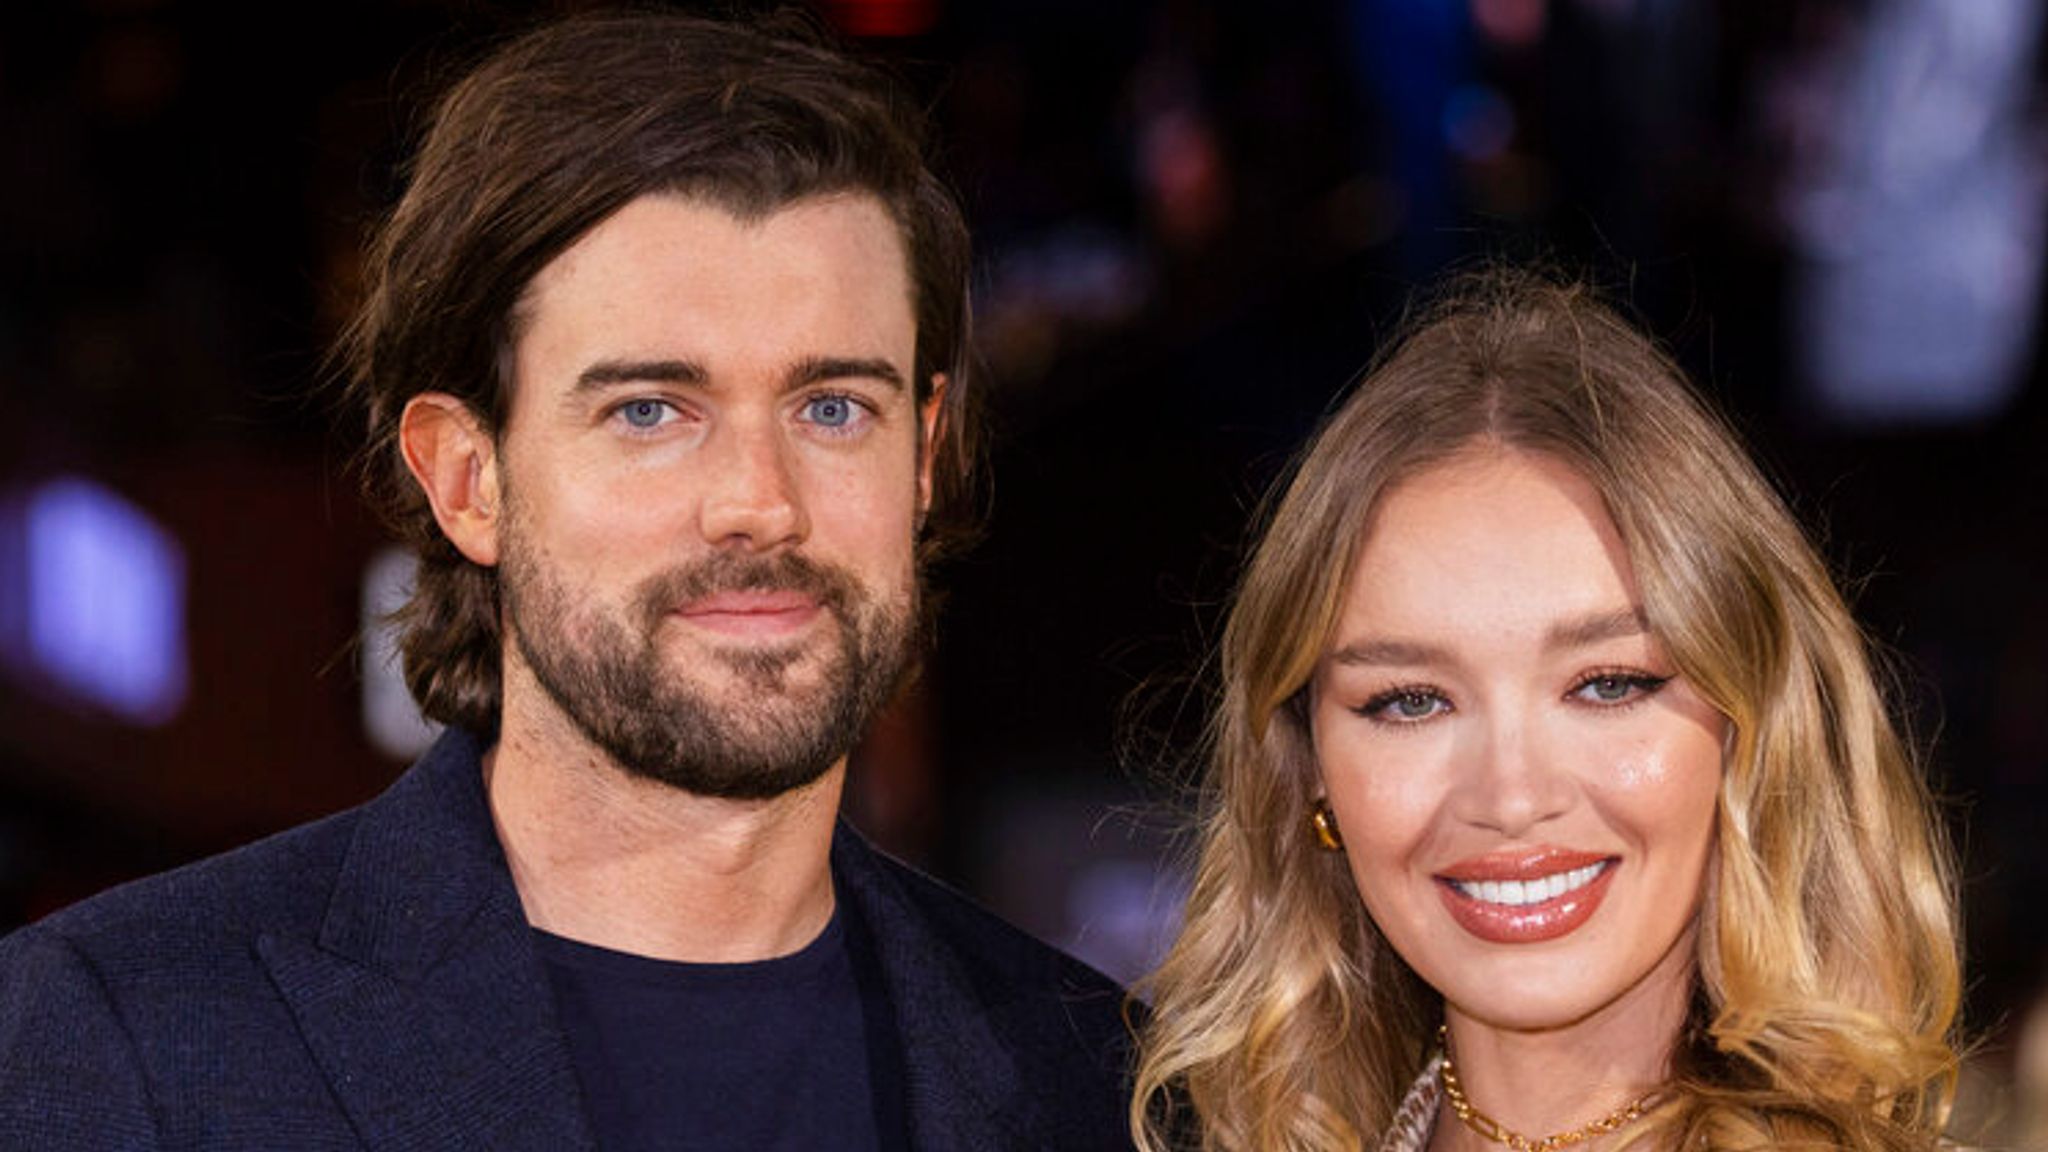 Jack Whitehall and girlfriend Roxy Horner expecting first baby Ents